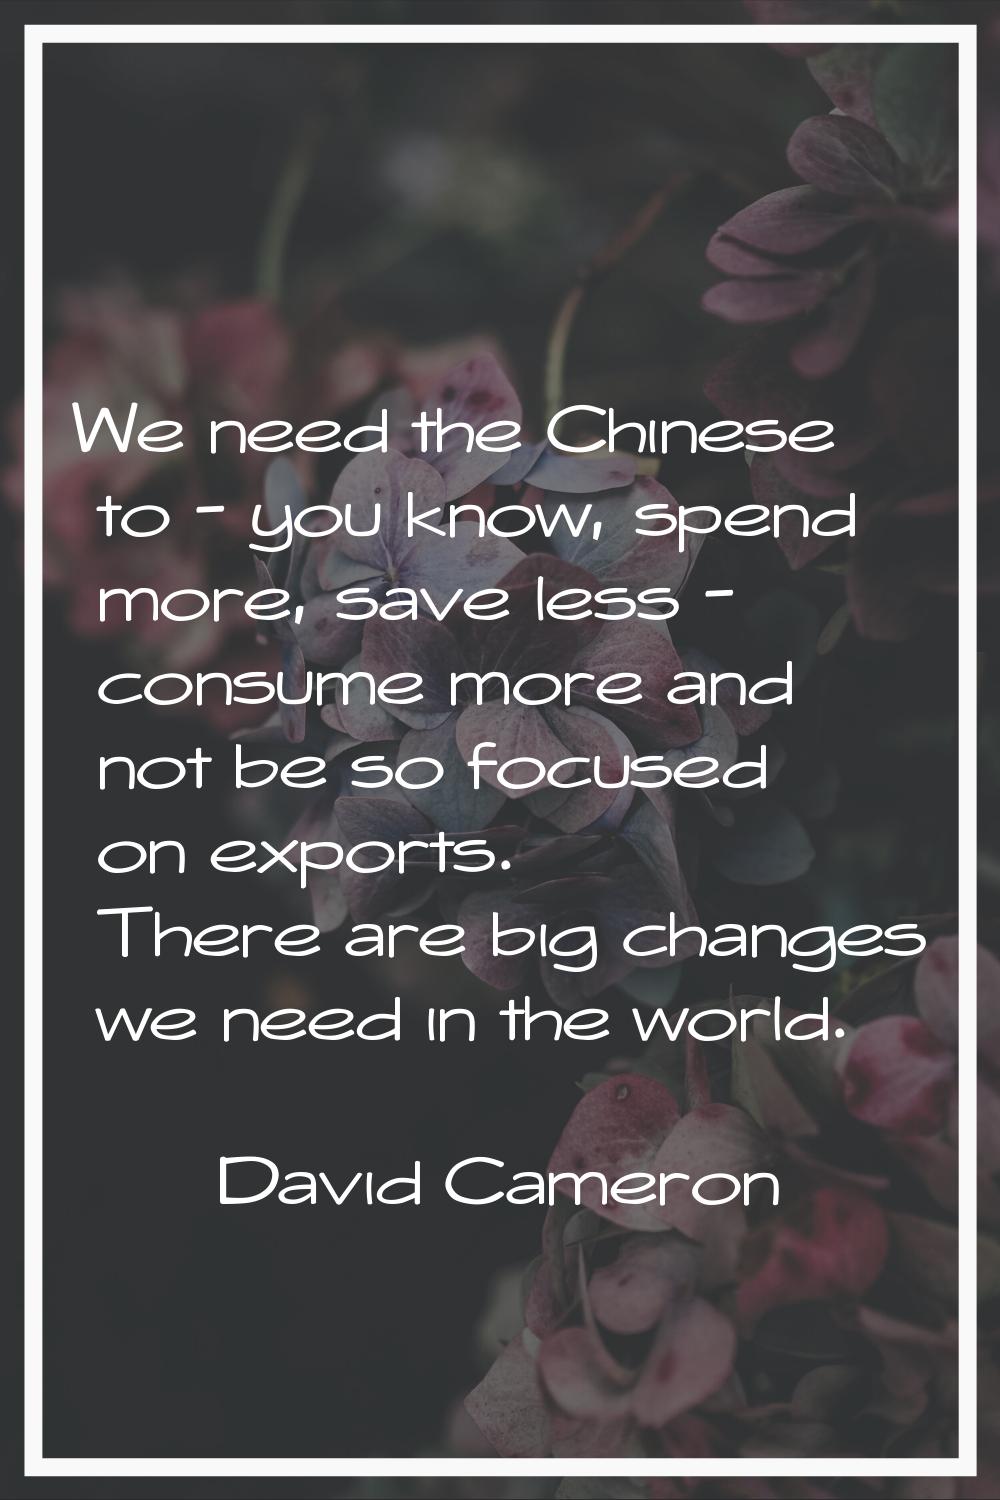 We need the Chinese to - you know, spend more, save less - consume more and not be so focused on ex